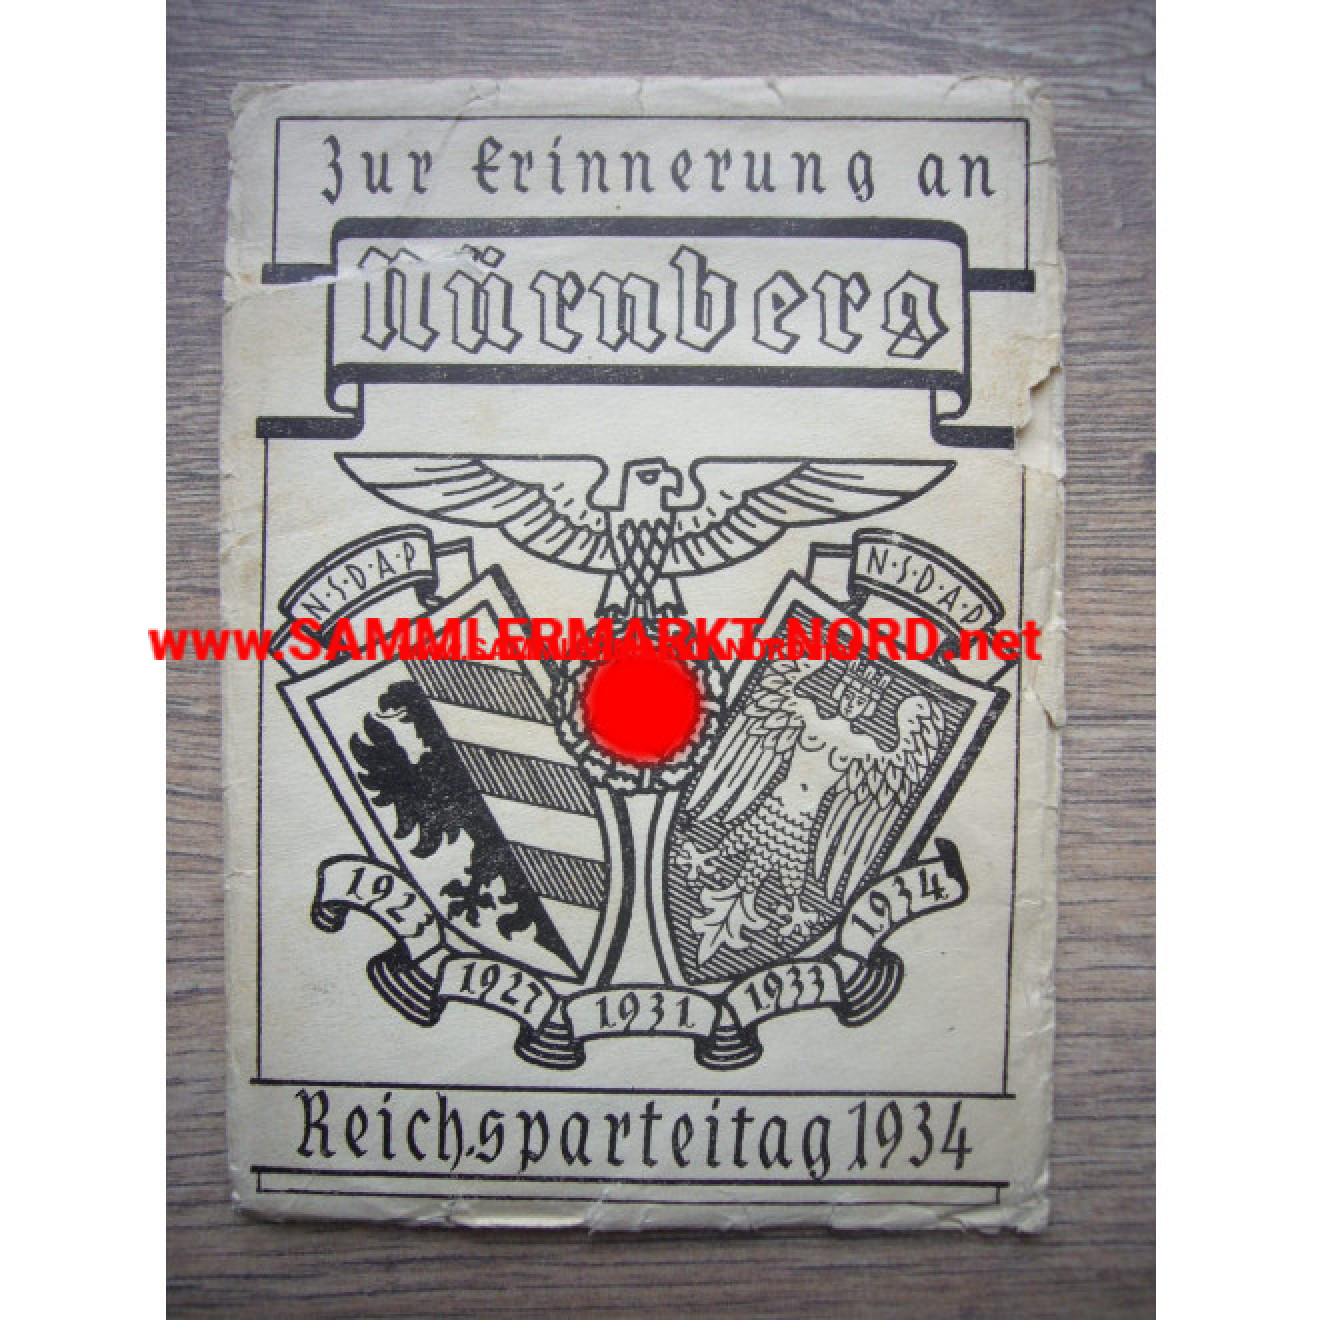 In memory of Nuremberg - Reichsparteitag (NSDAP) 1934 - Protective cover